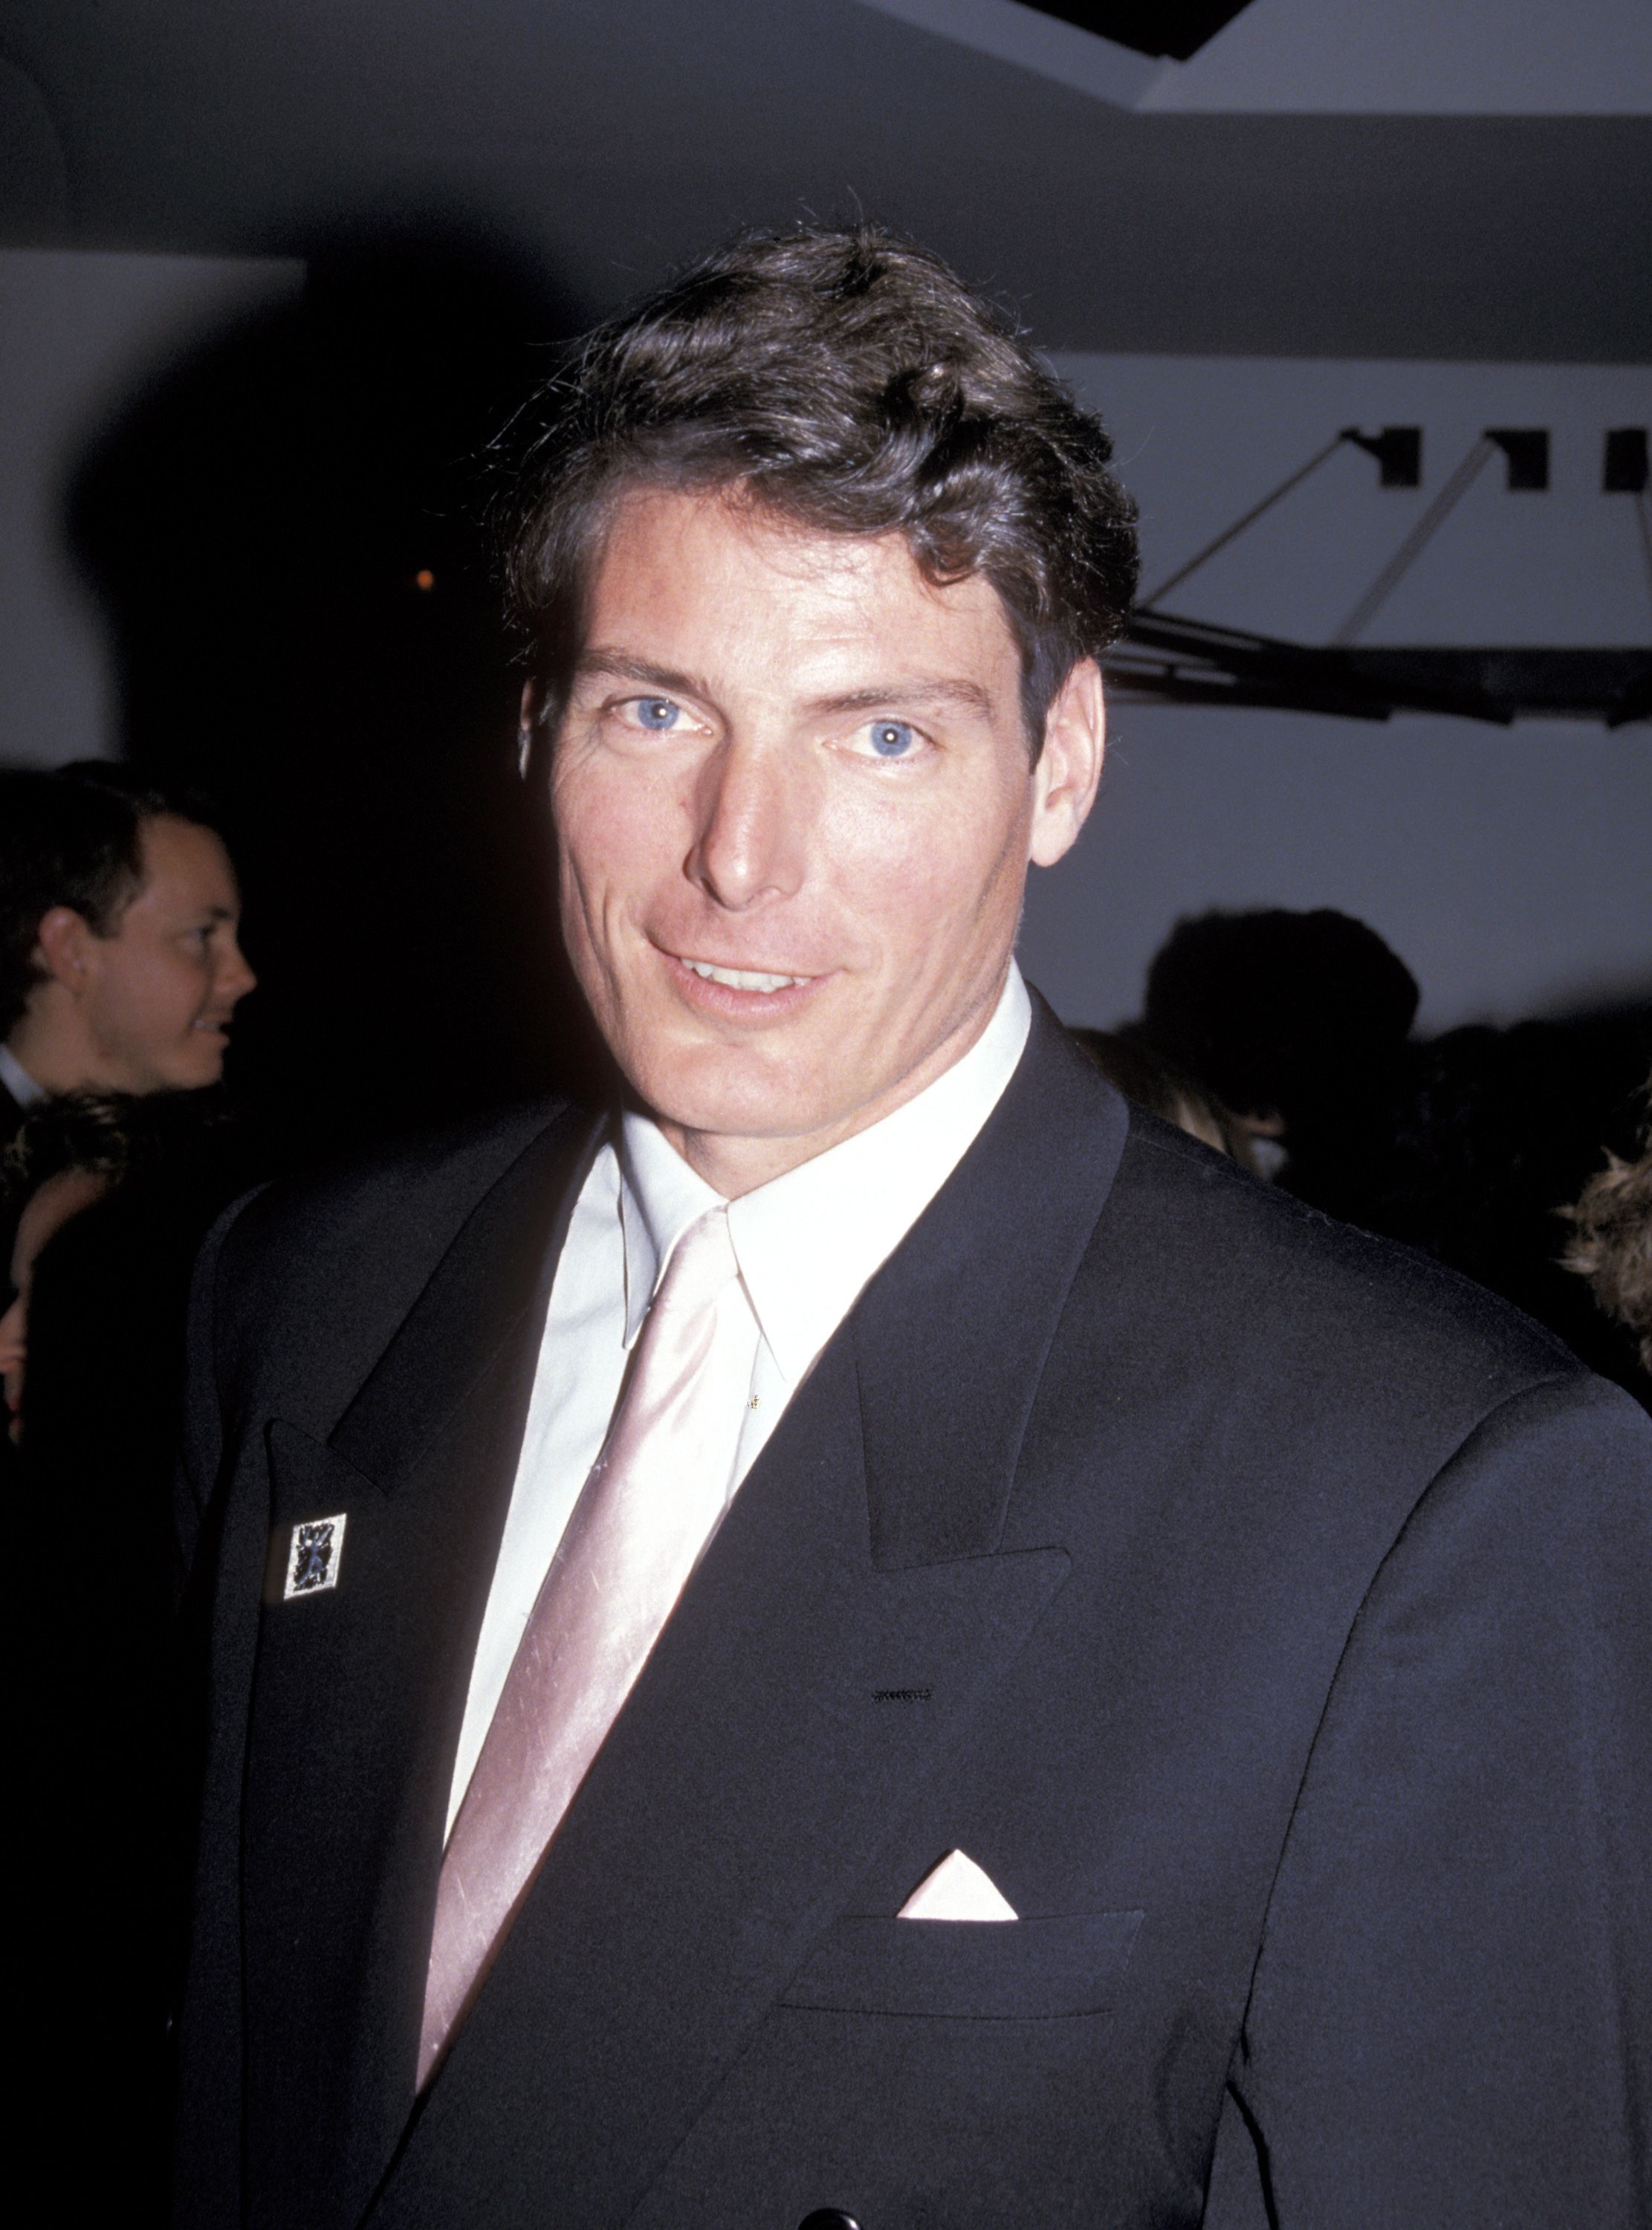 Superman: Why Christopher Reeve Was The Smartest Man of Steel